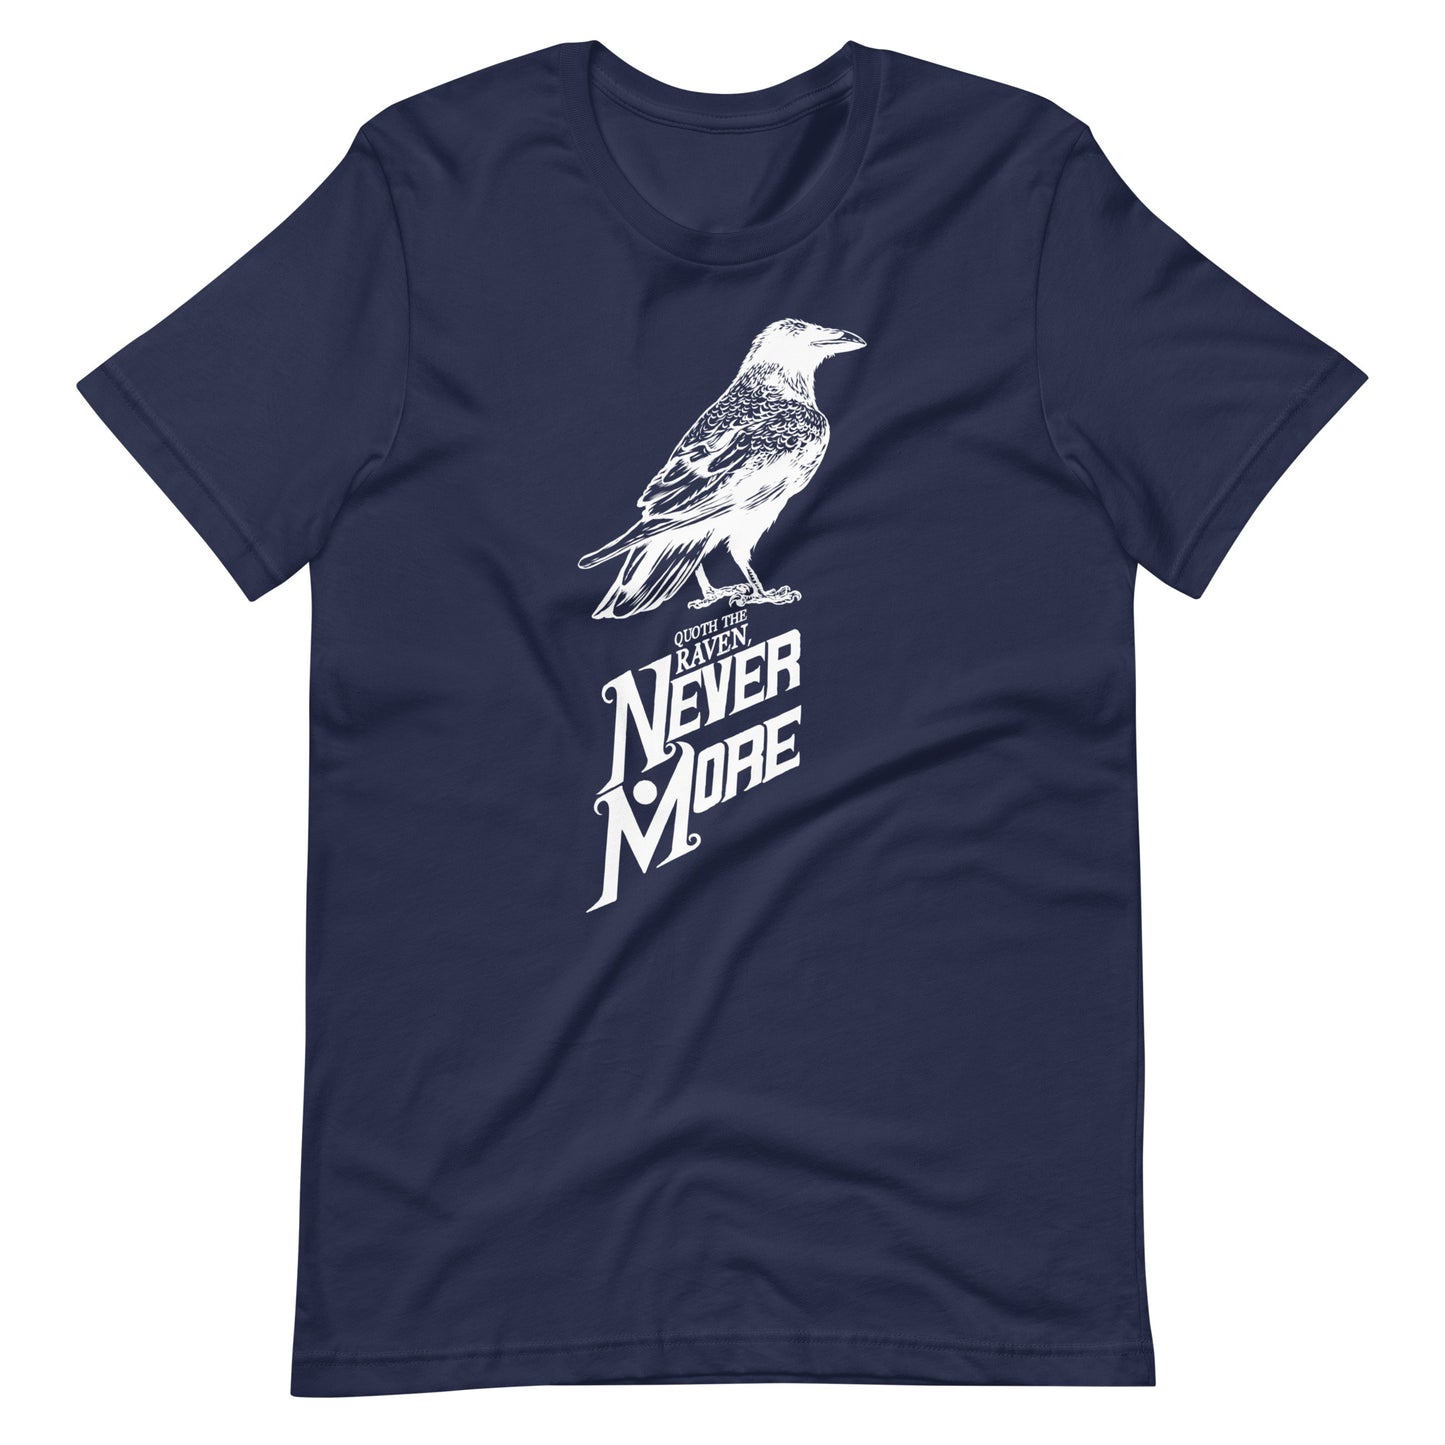 Quoth the Raven Nevermore - Men's t-shirt - Navy Front